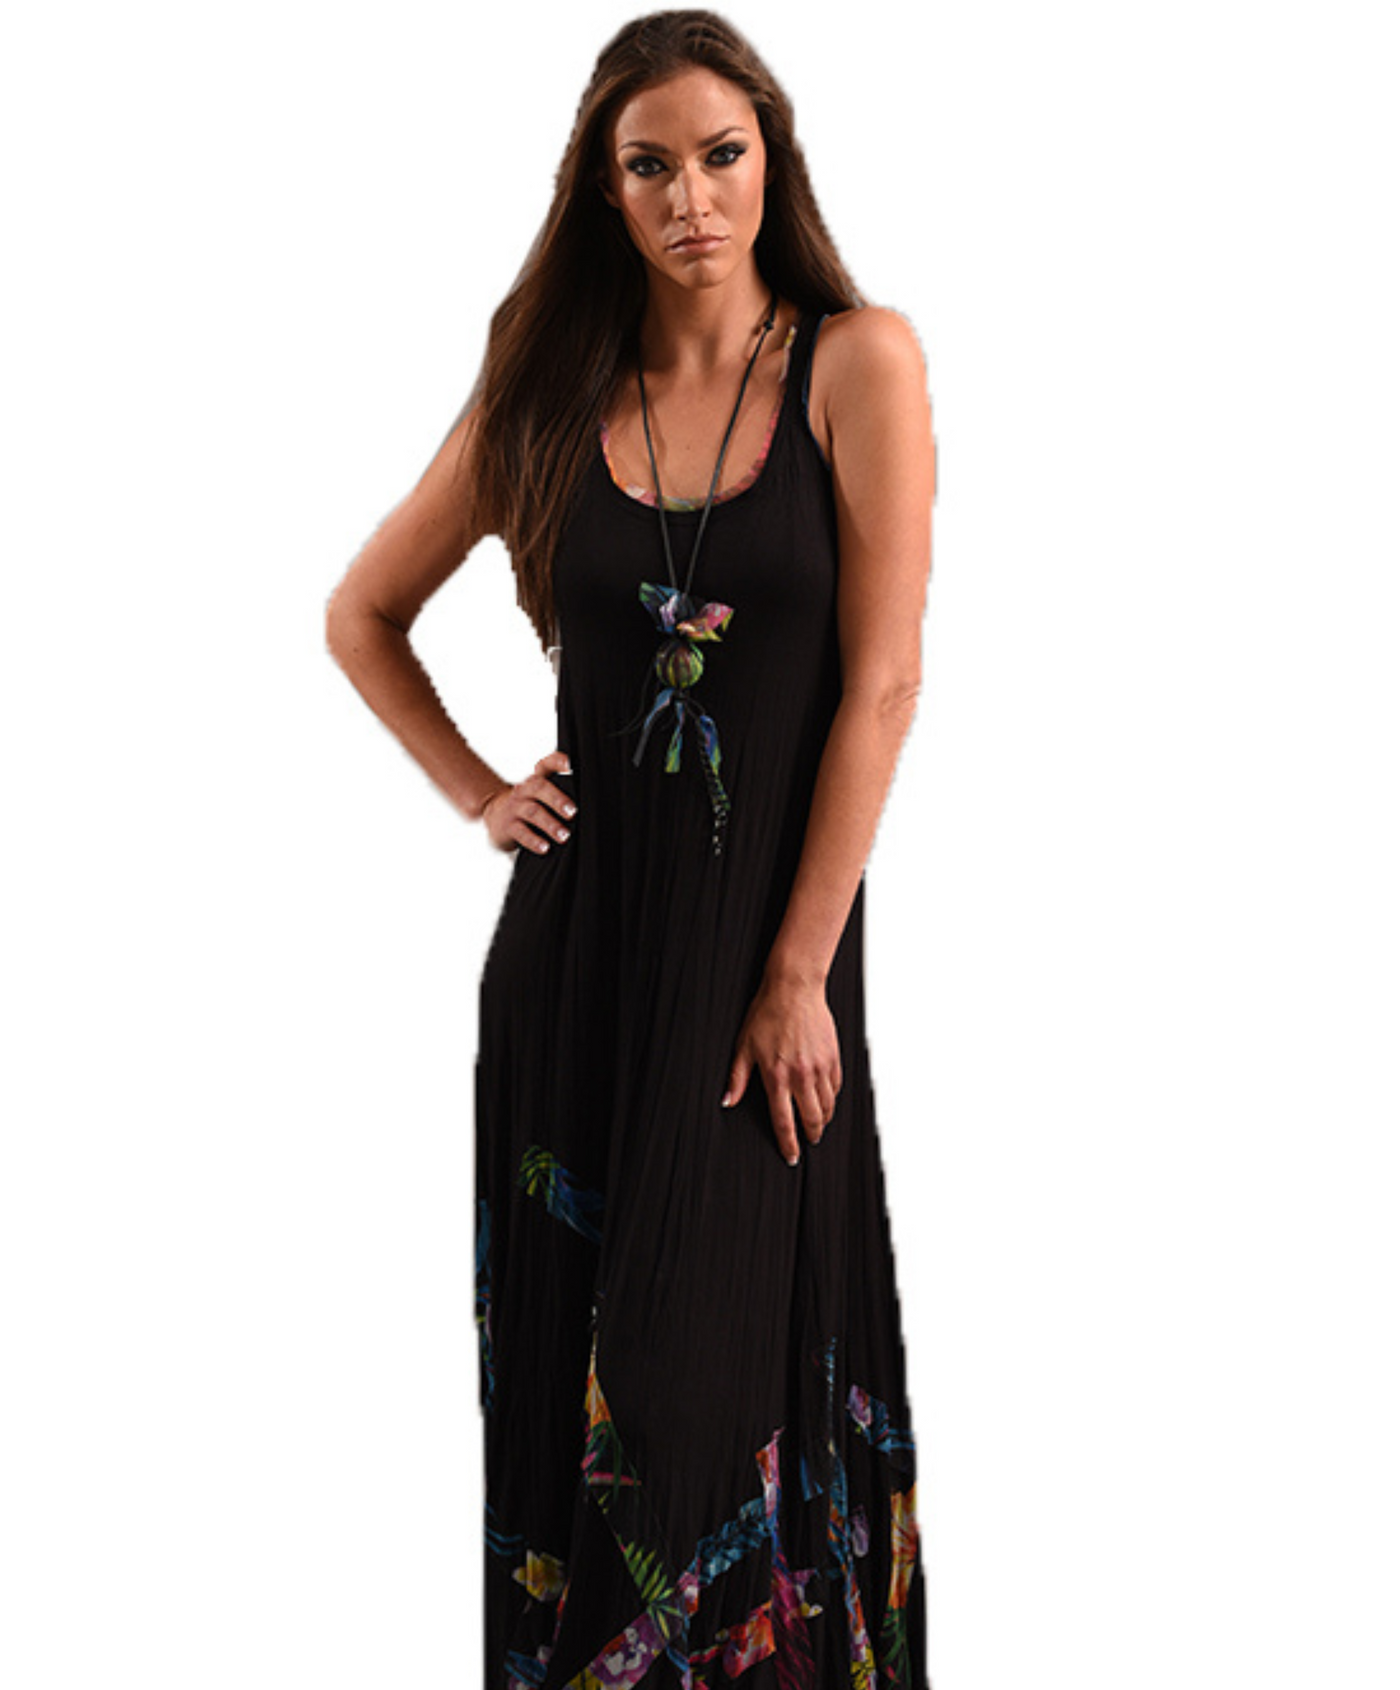 Bra-Friendly Vibrant Tropical Dress with Necklace